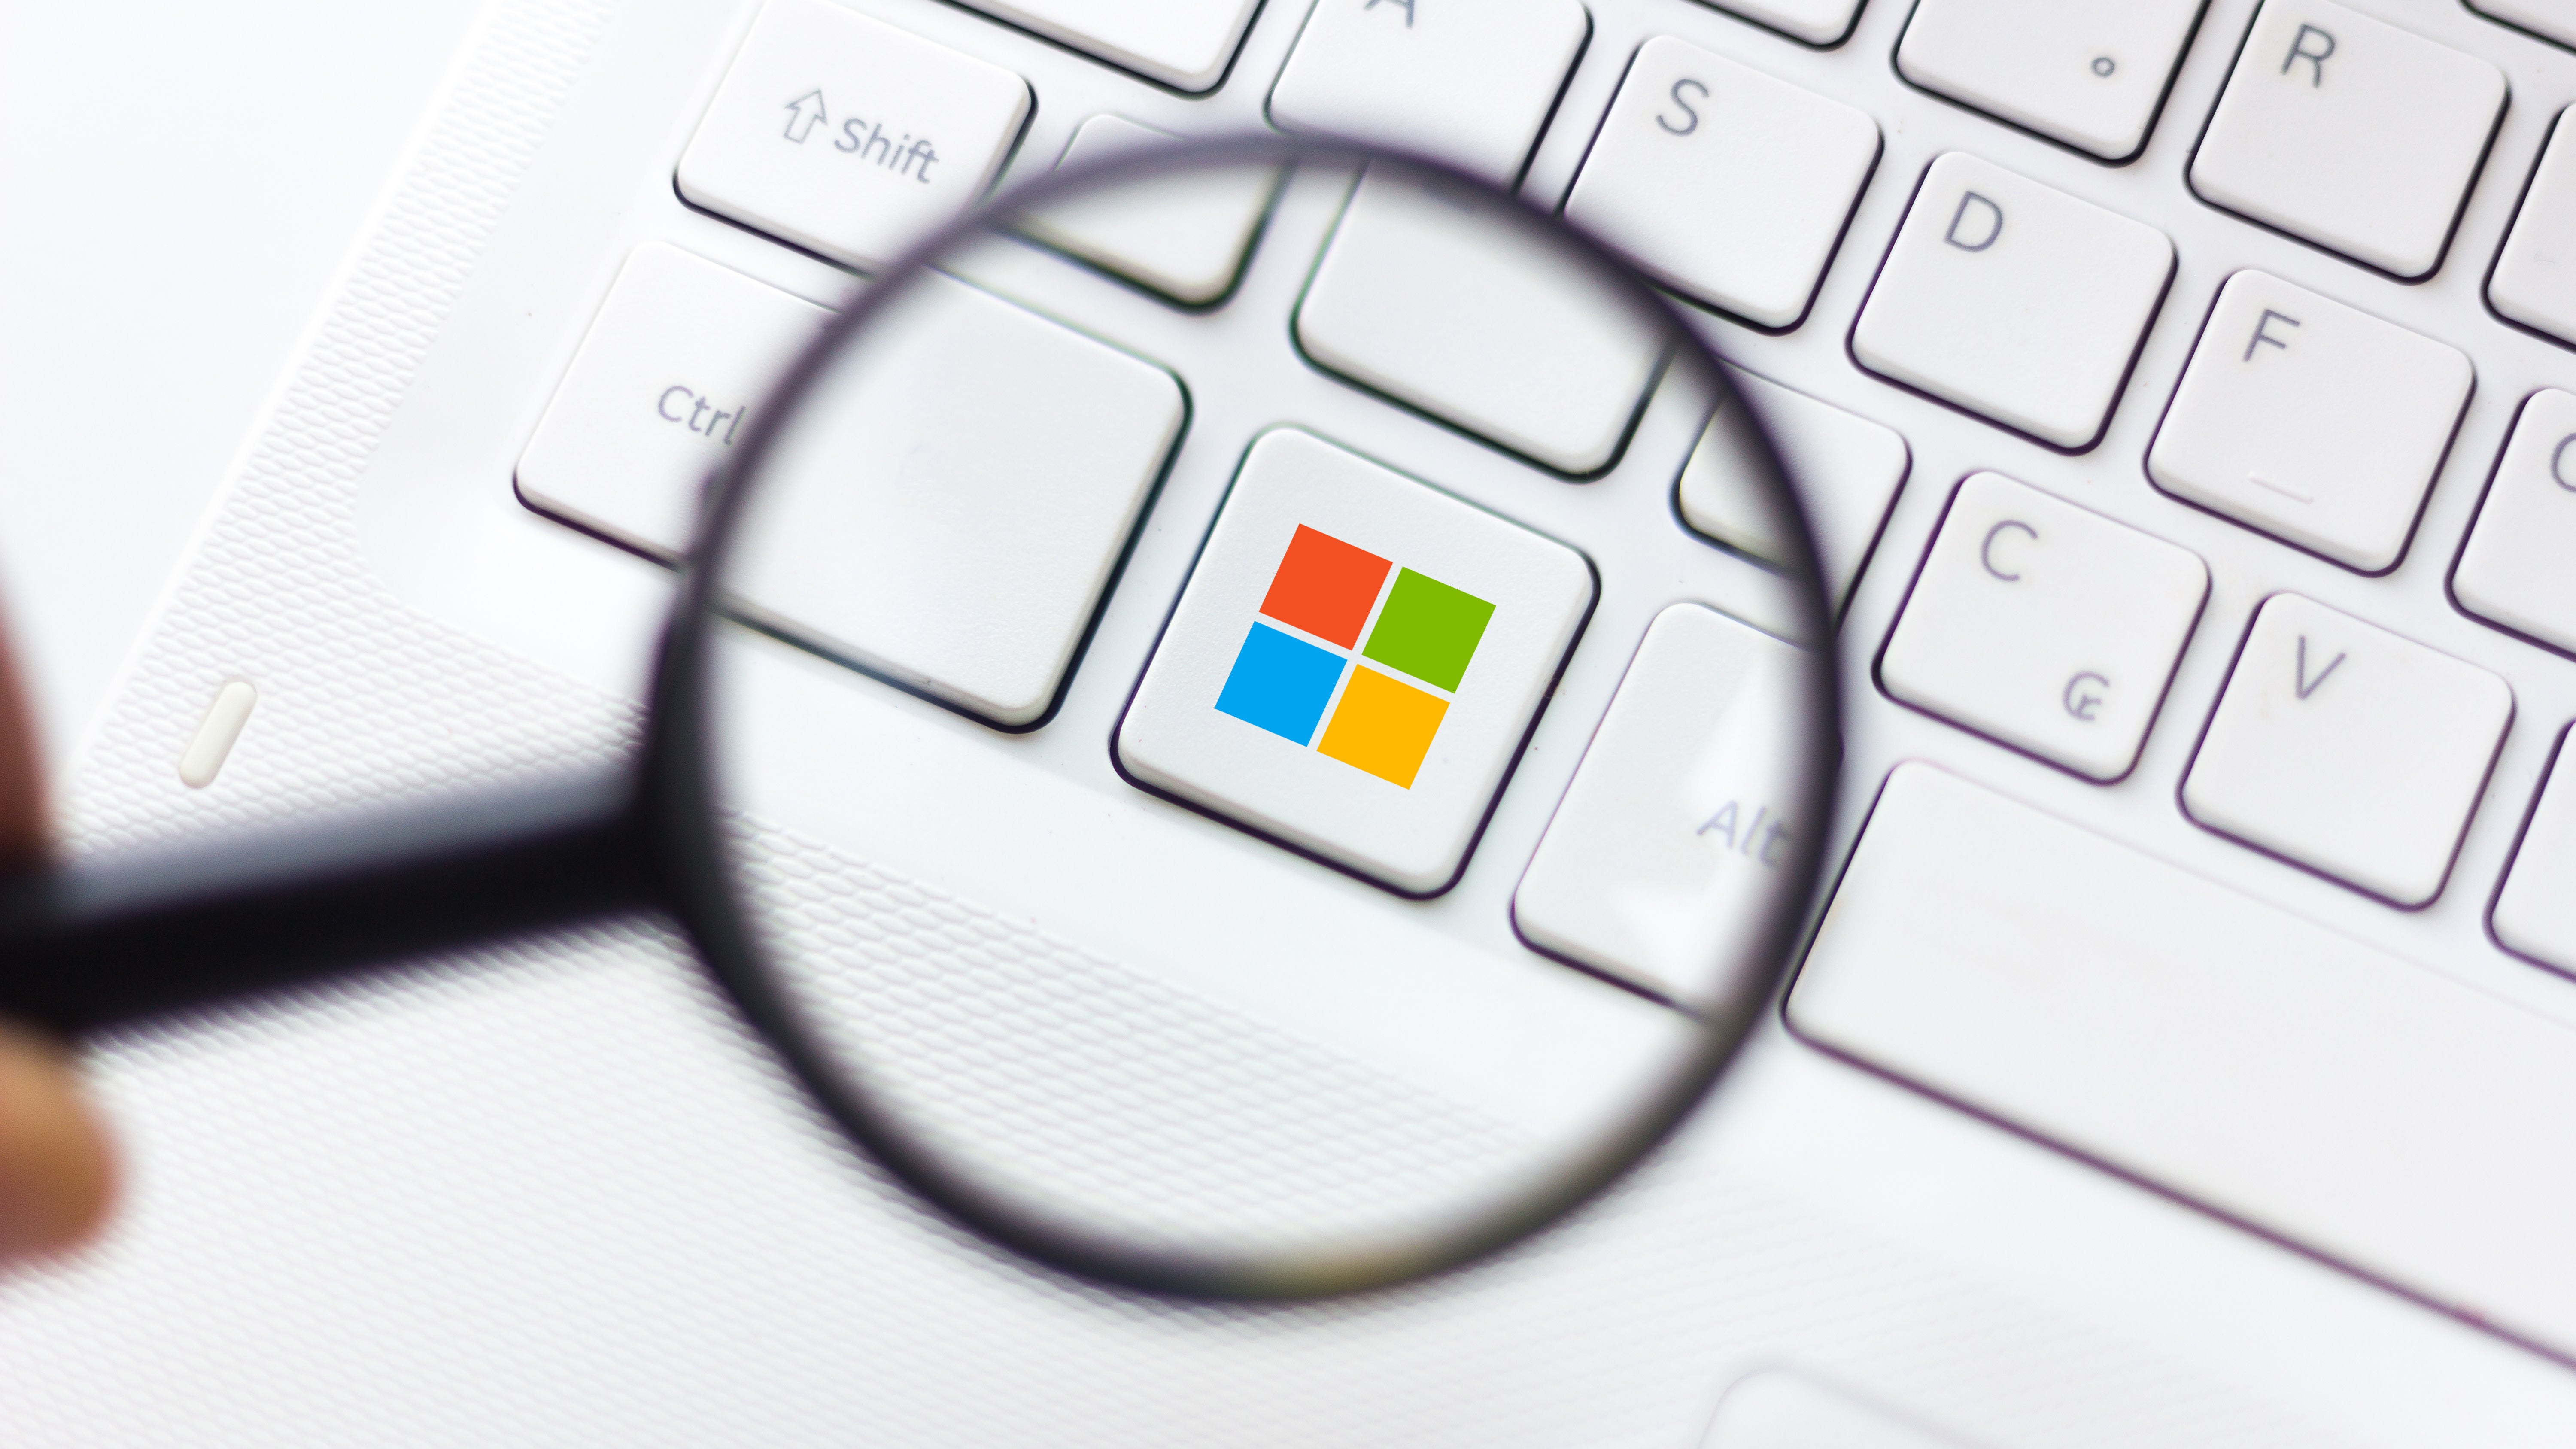 Account Security Is Your Job, Not Microsoft’s